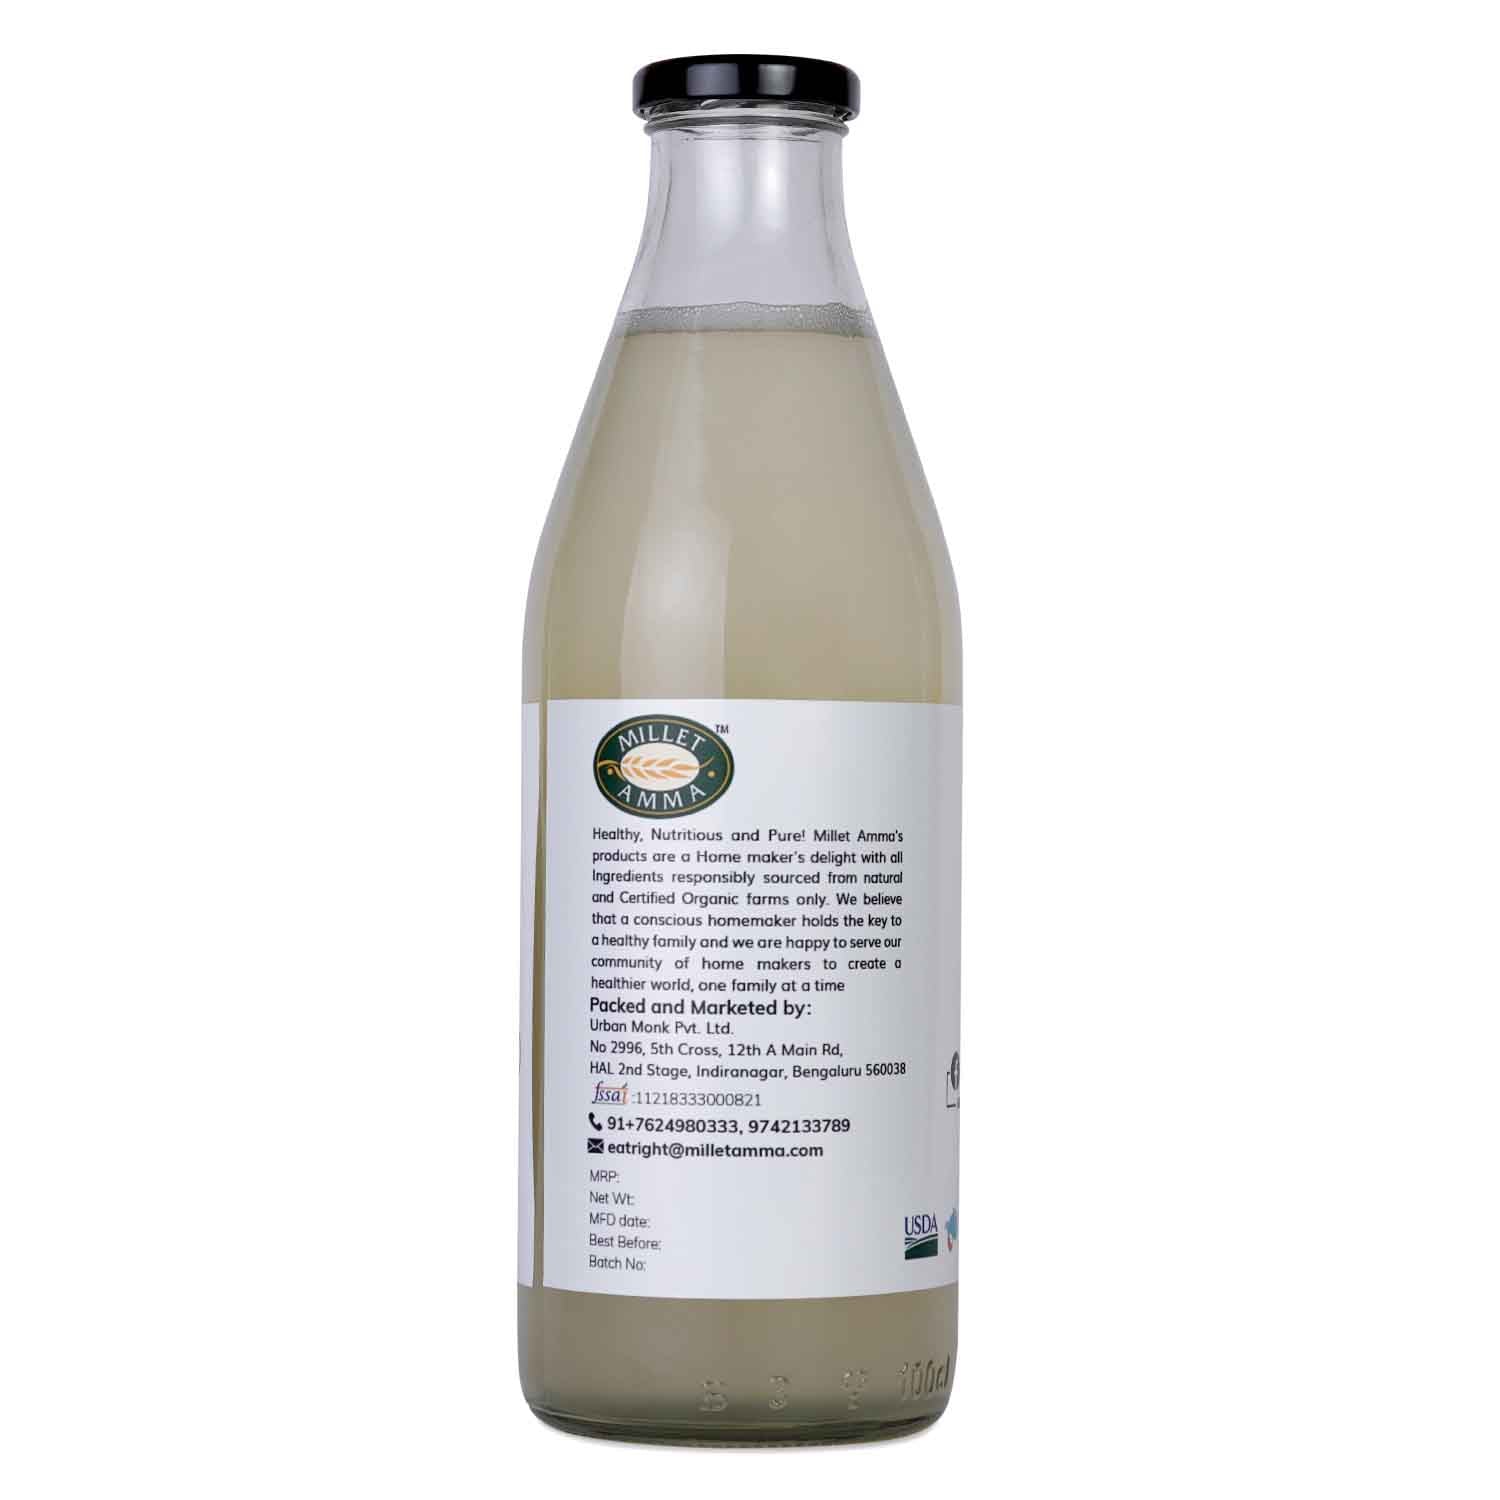 Millet Amma’s Organic Cold Pressed Virgin Coconut Oil- Introducing to you our highly nutritious and yummy Organic Cold Pressed Virgin Coconut Oil.  Made from Organic Coconuts, it helps raise good cholesterol levels.  Cold Pressed Oils are extremely healthy as they retain the nutrients  after extraction and processing.